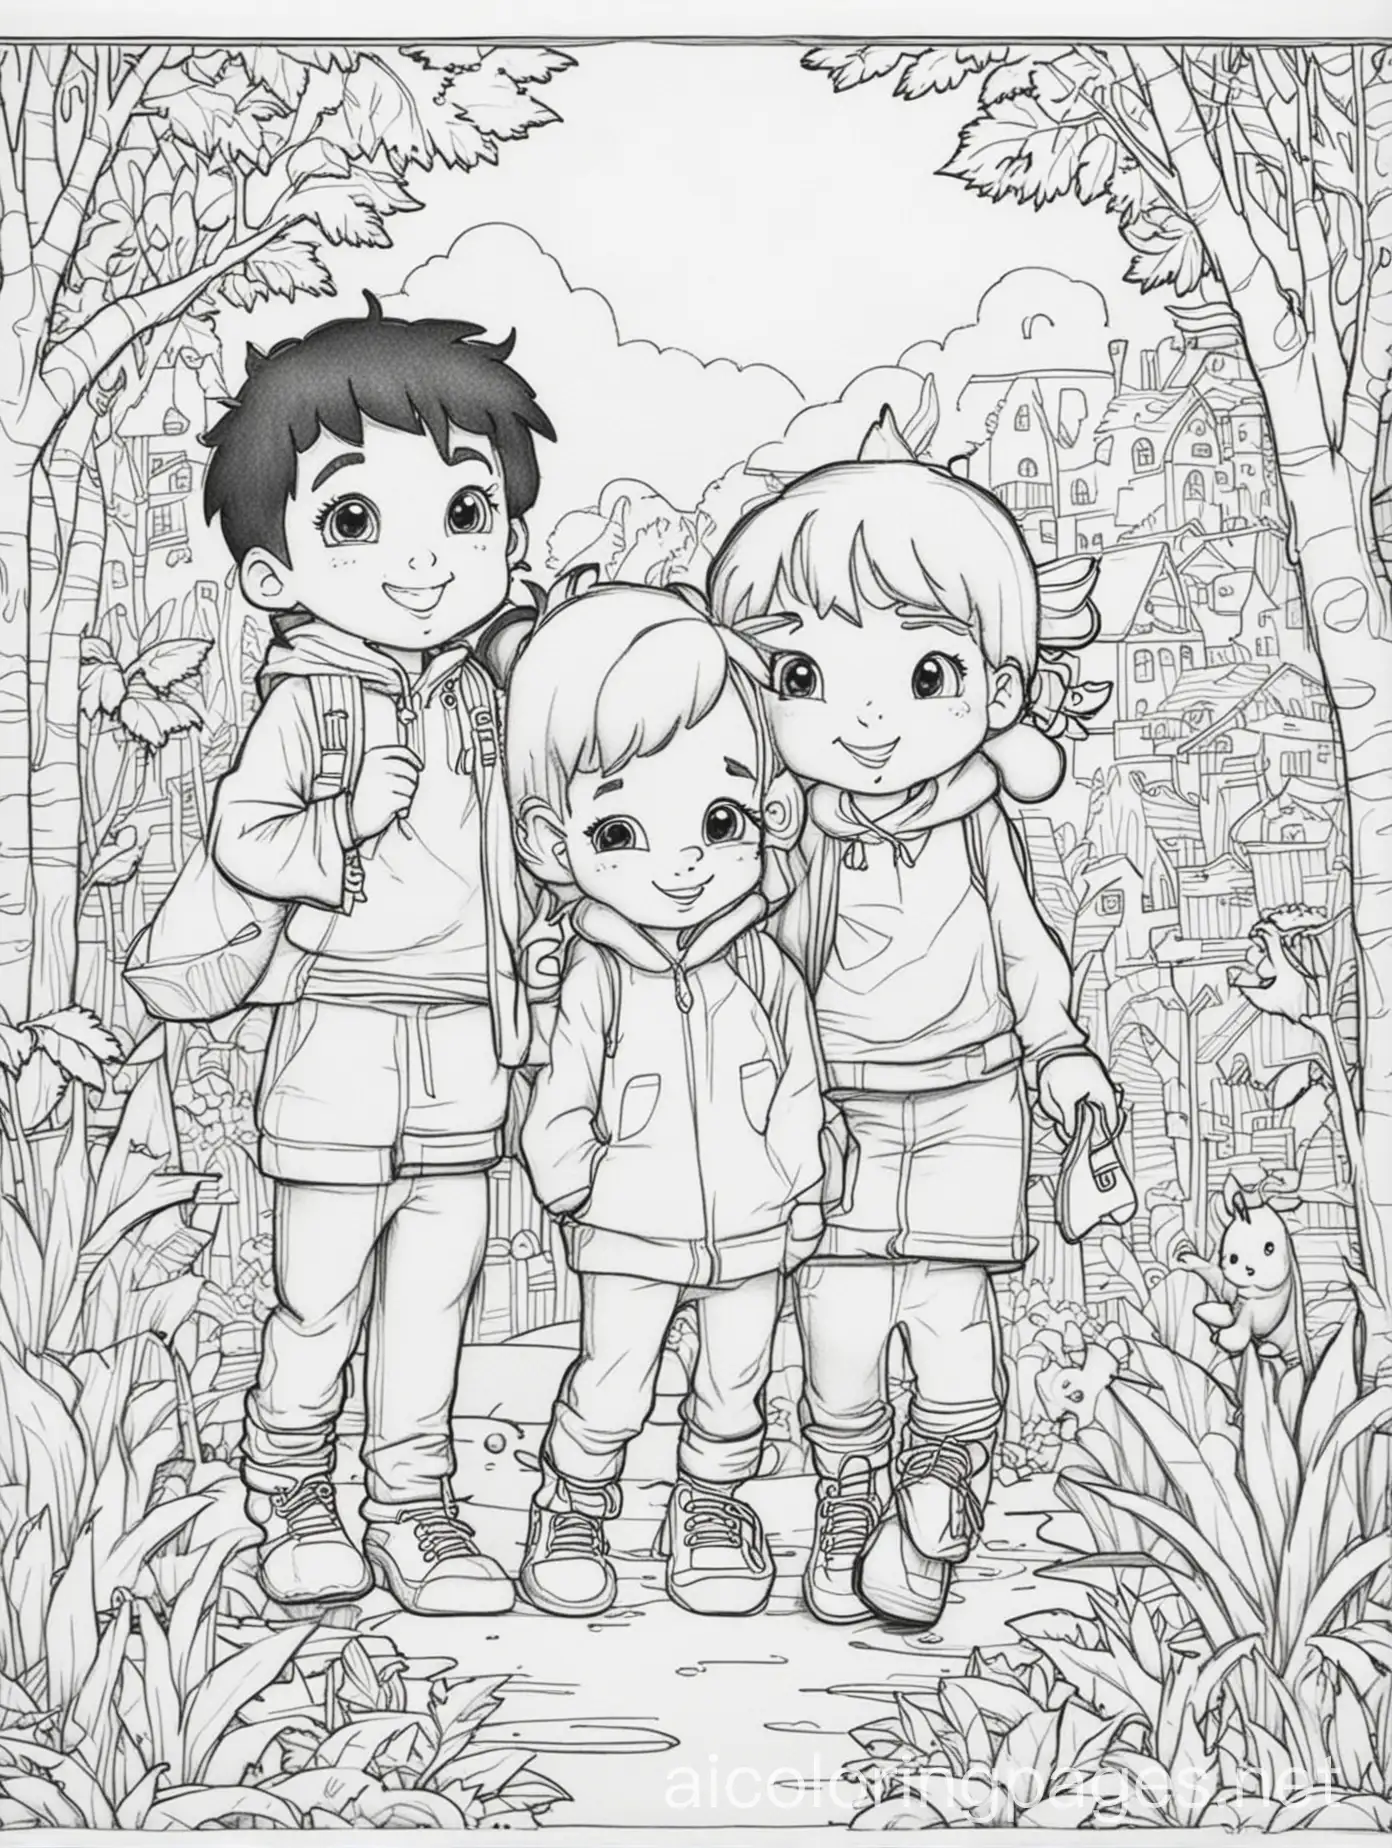 Hide and Seek Kids fun with friends., Coloring Page, black and white, line art, white background, Simplicity, Ample White Space. The background of the coloring page is plain white to make it easy for young children to color within the lines. The outlines of all the subjects are easy to distinguish, making it simple for kids to color without too much difficulty